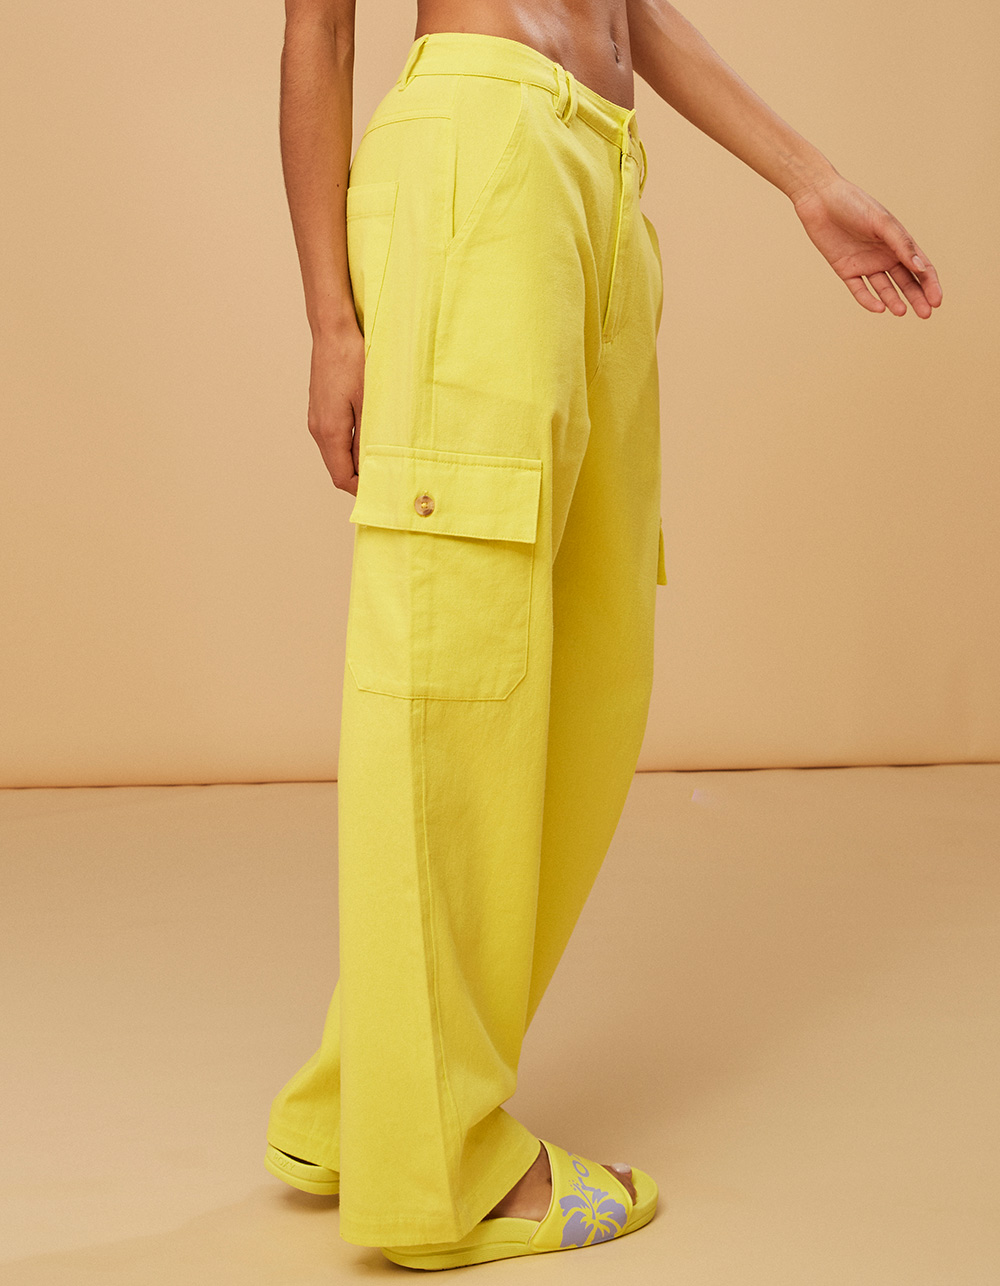 Kind Womens Pants Tillys | Cargo Surf Bosworth Kate Kate YELLOW - ROXY x